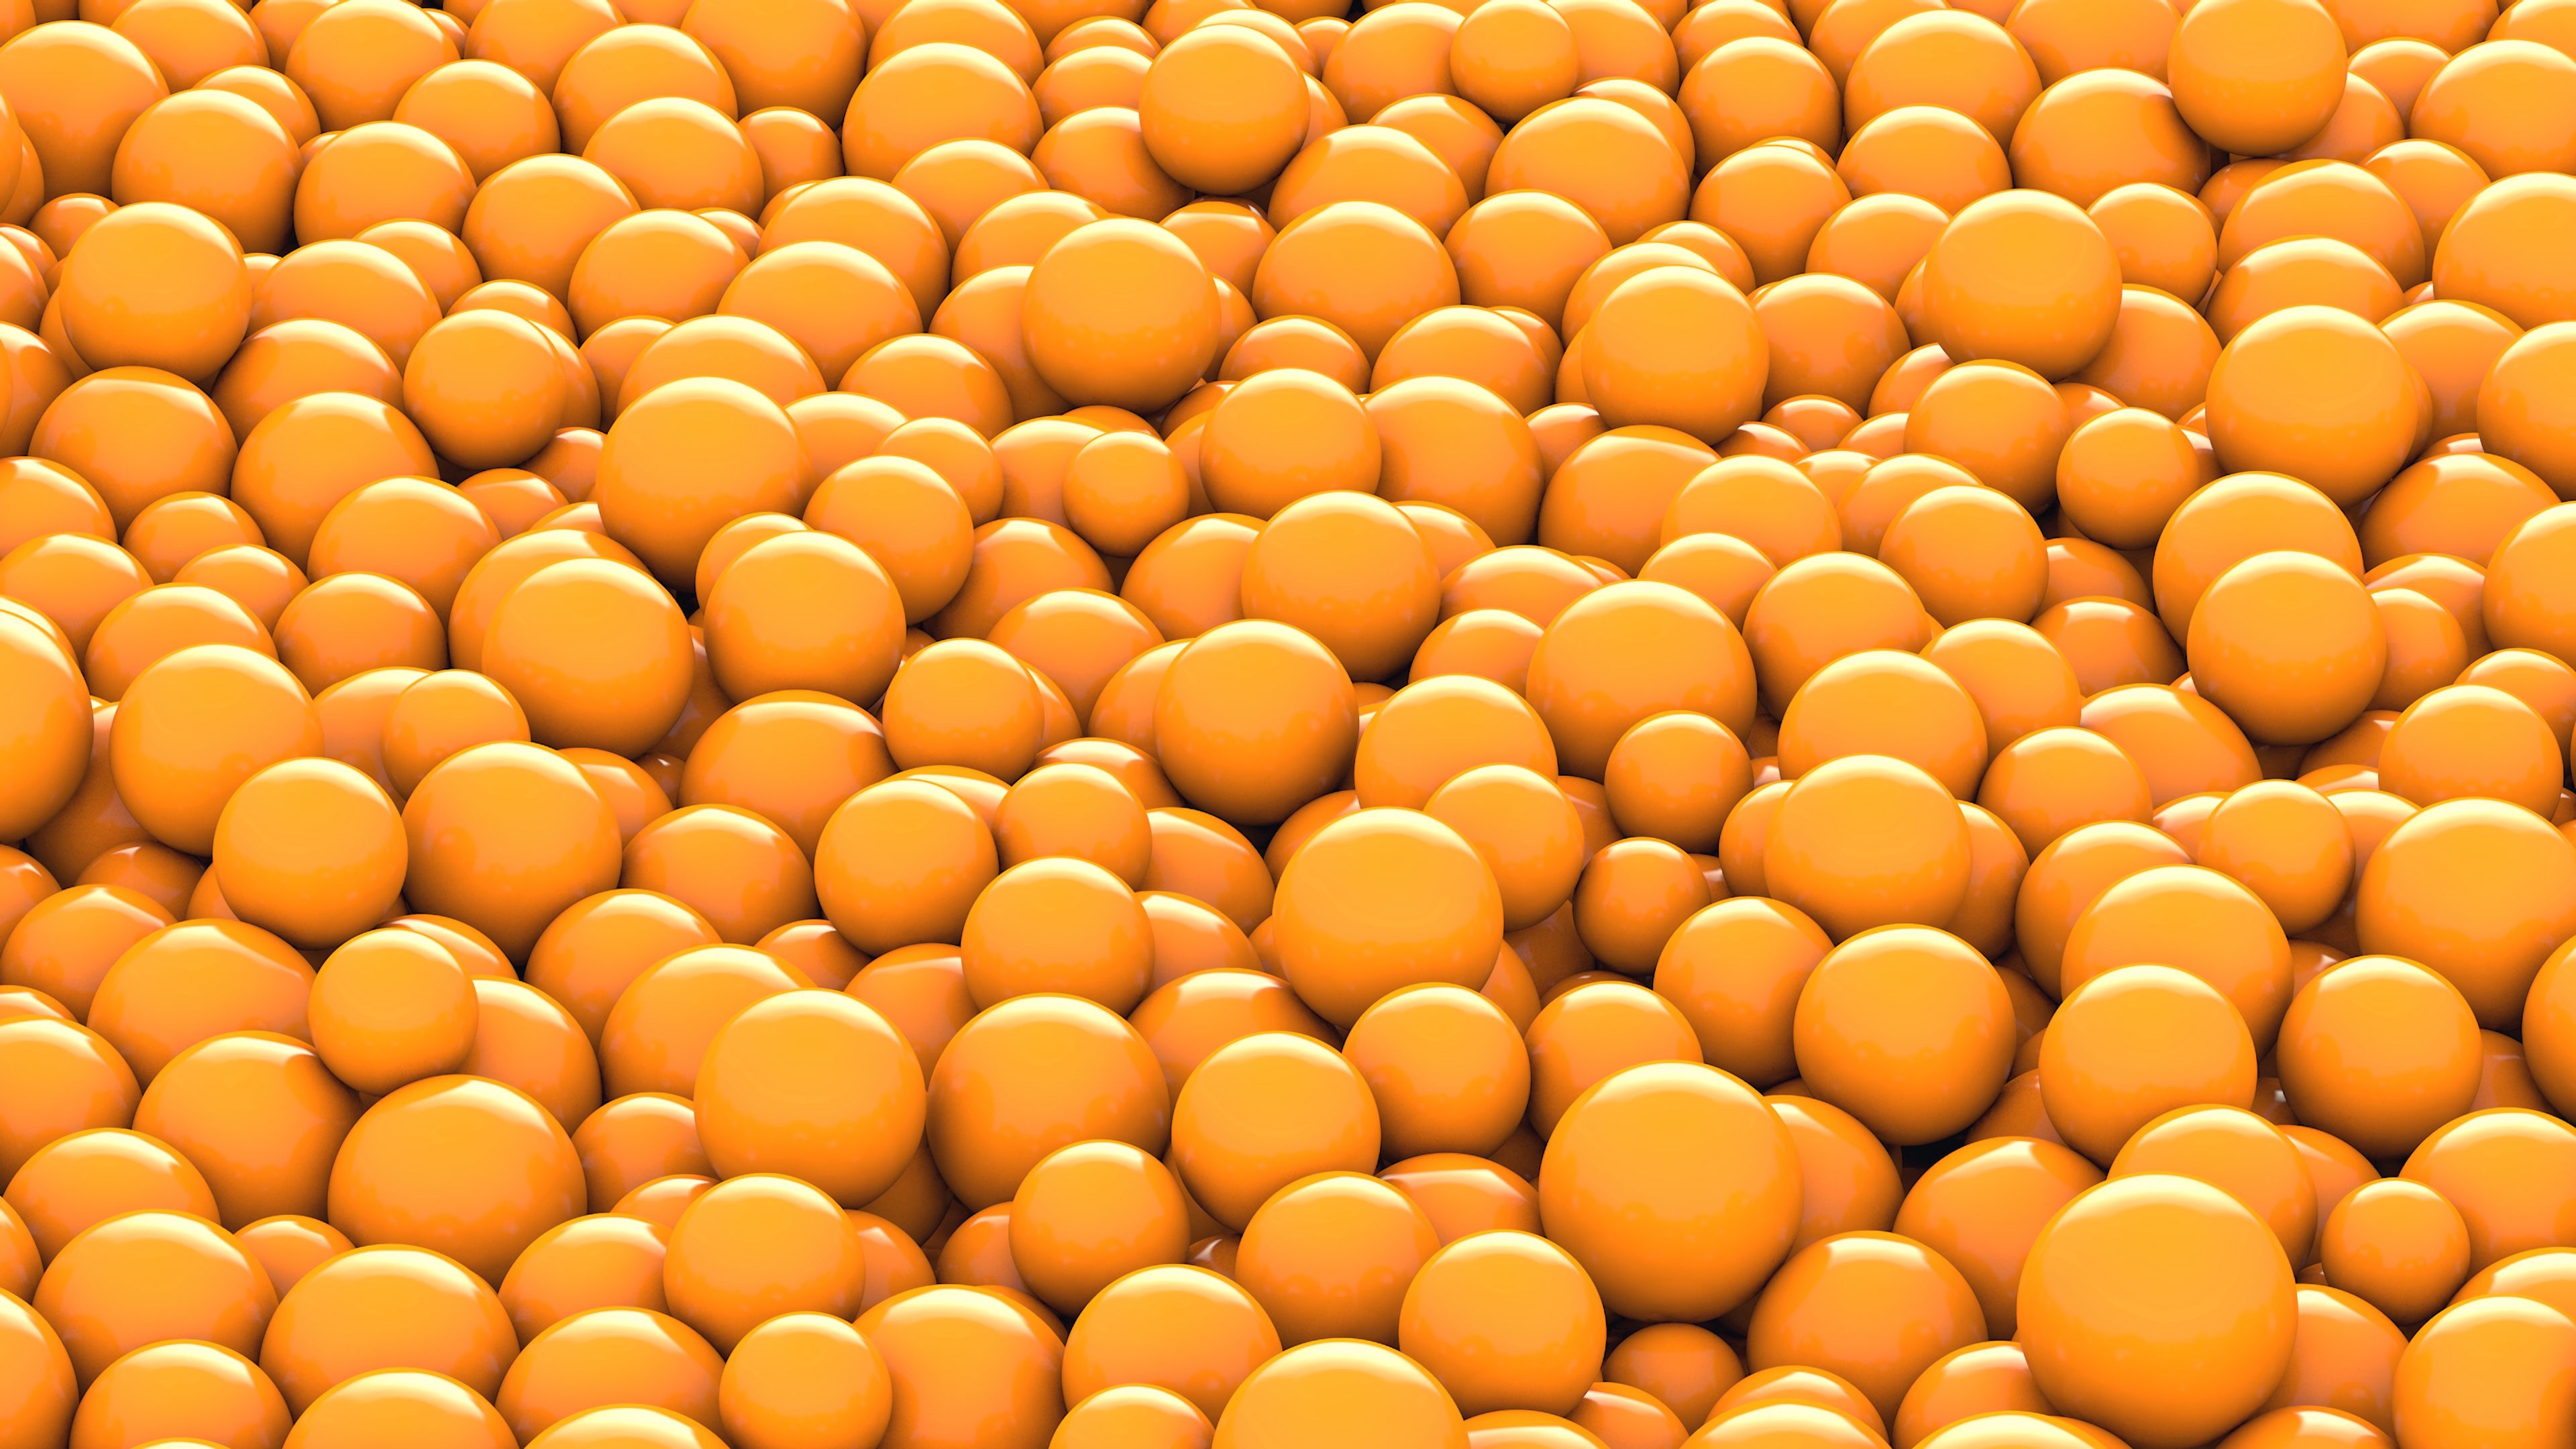 91991 2560x1080 PC pictures for free, download 3d, round, orange, balls 2560x1080 wallpapers on your desktop